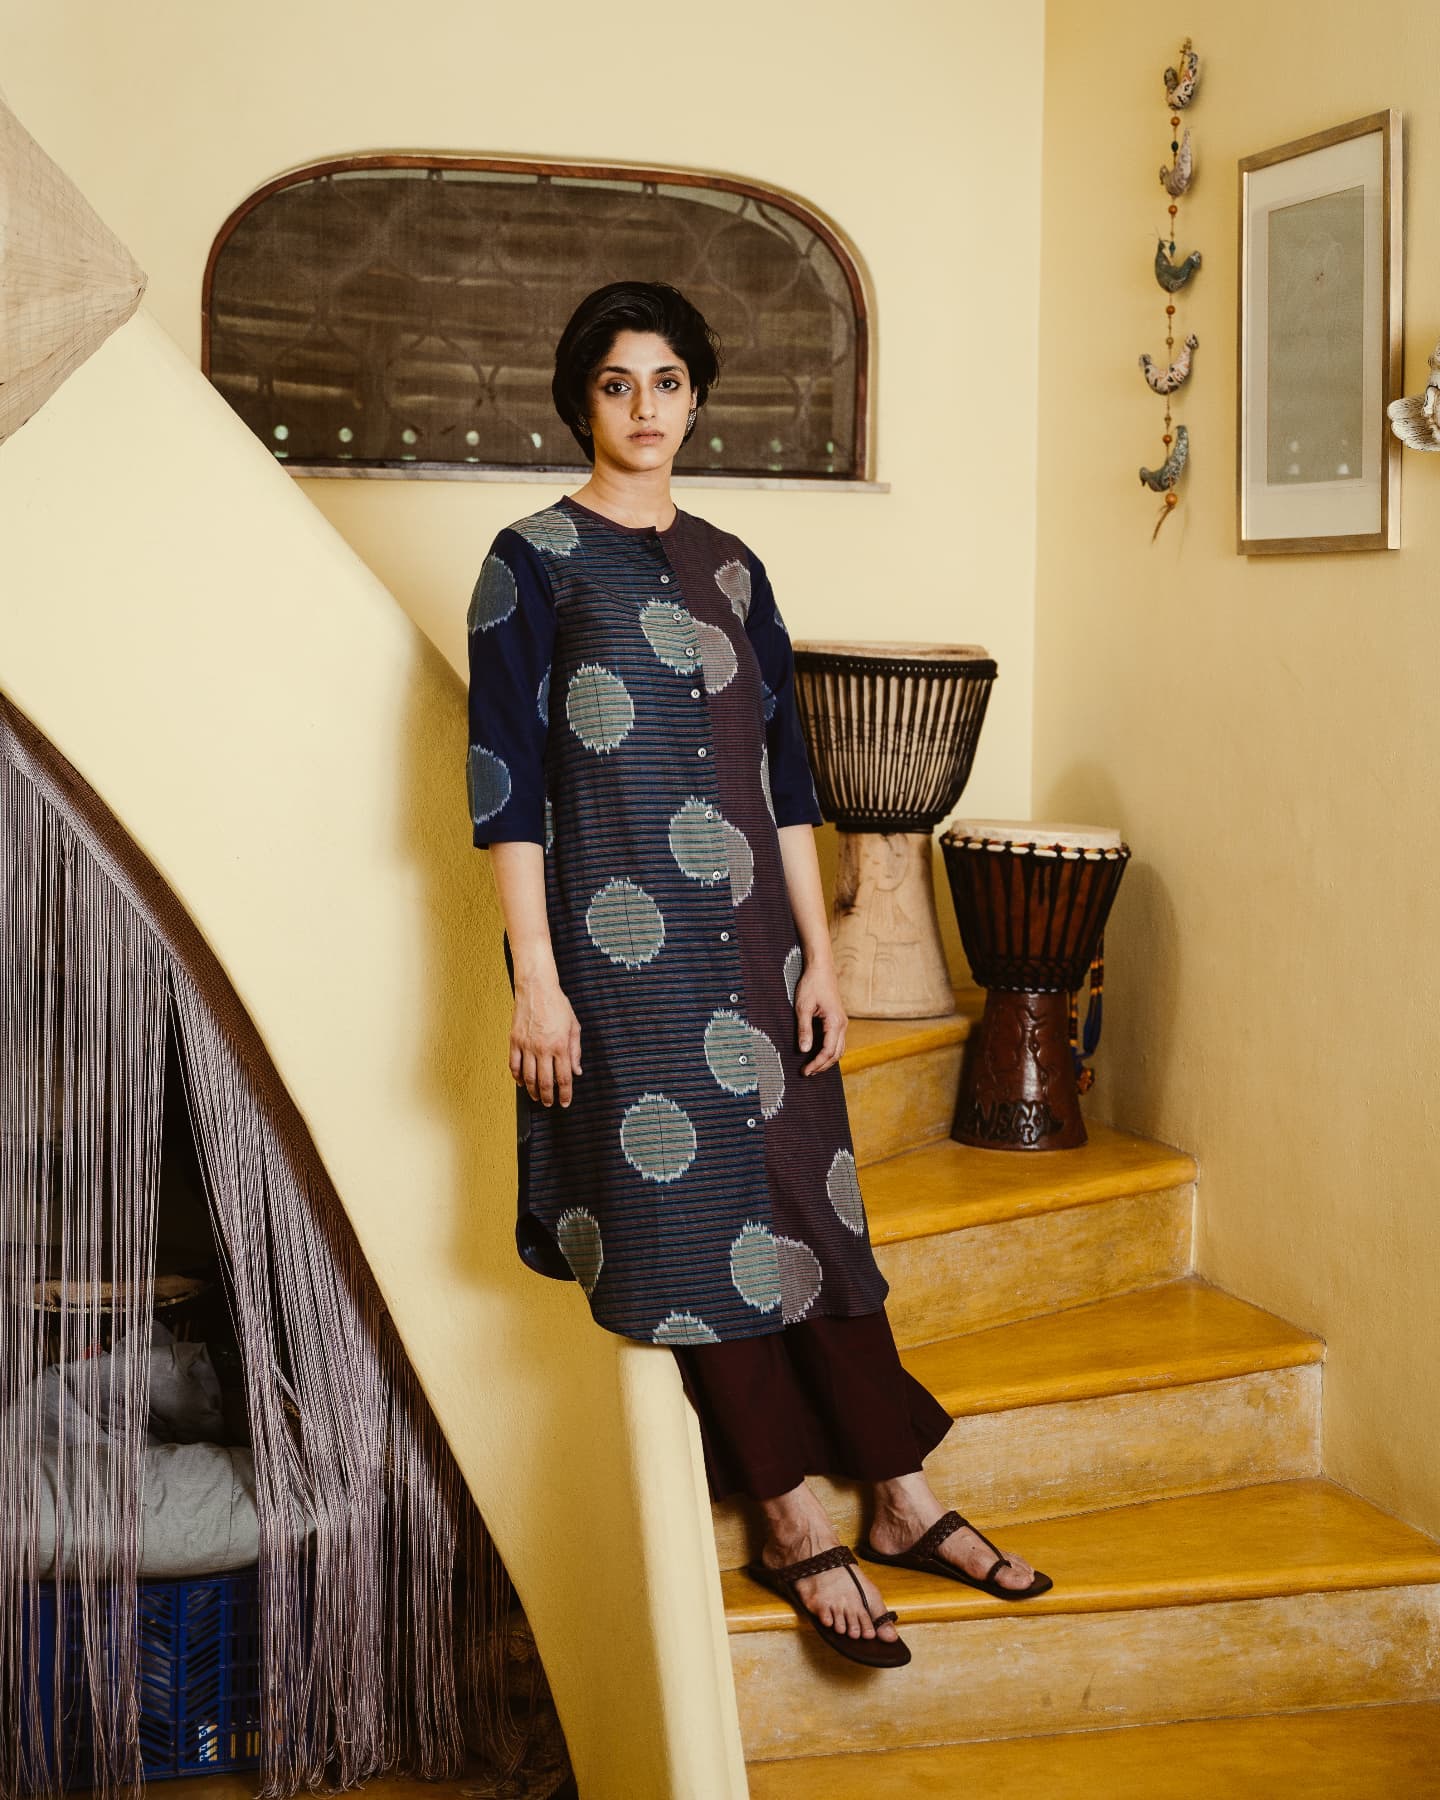 Translate-Handwoven Ikat - transforming the traditional handcrafted textile to comfortable timeless clothing and lifestyle